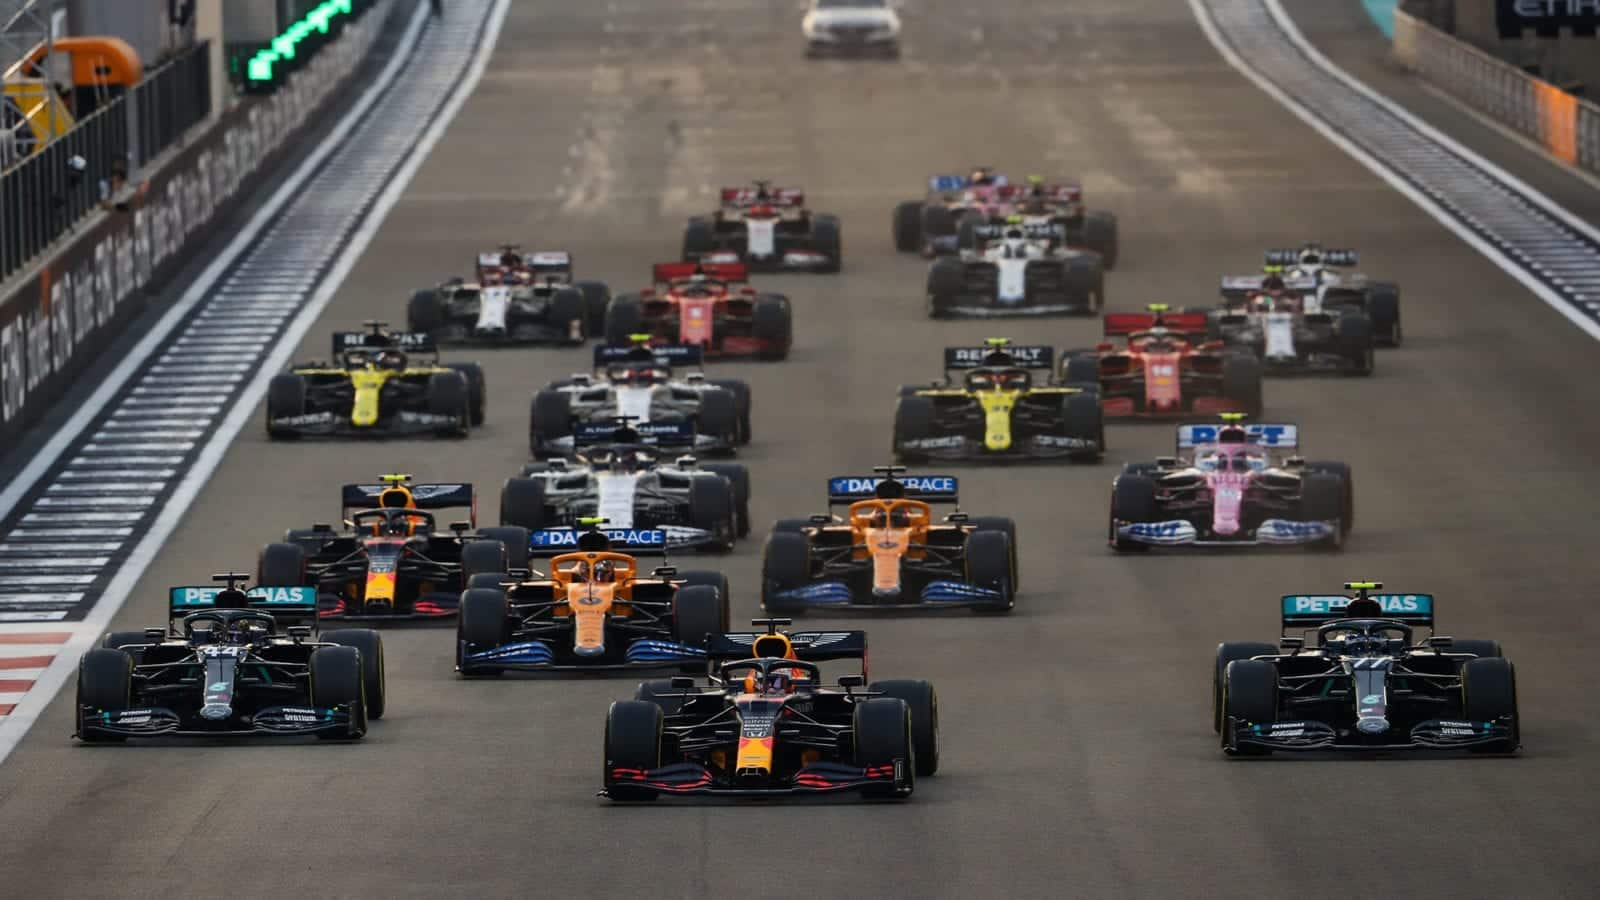 Max Verstappen leads at the start of the 2020 Abu Dhabi Grand Prix